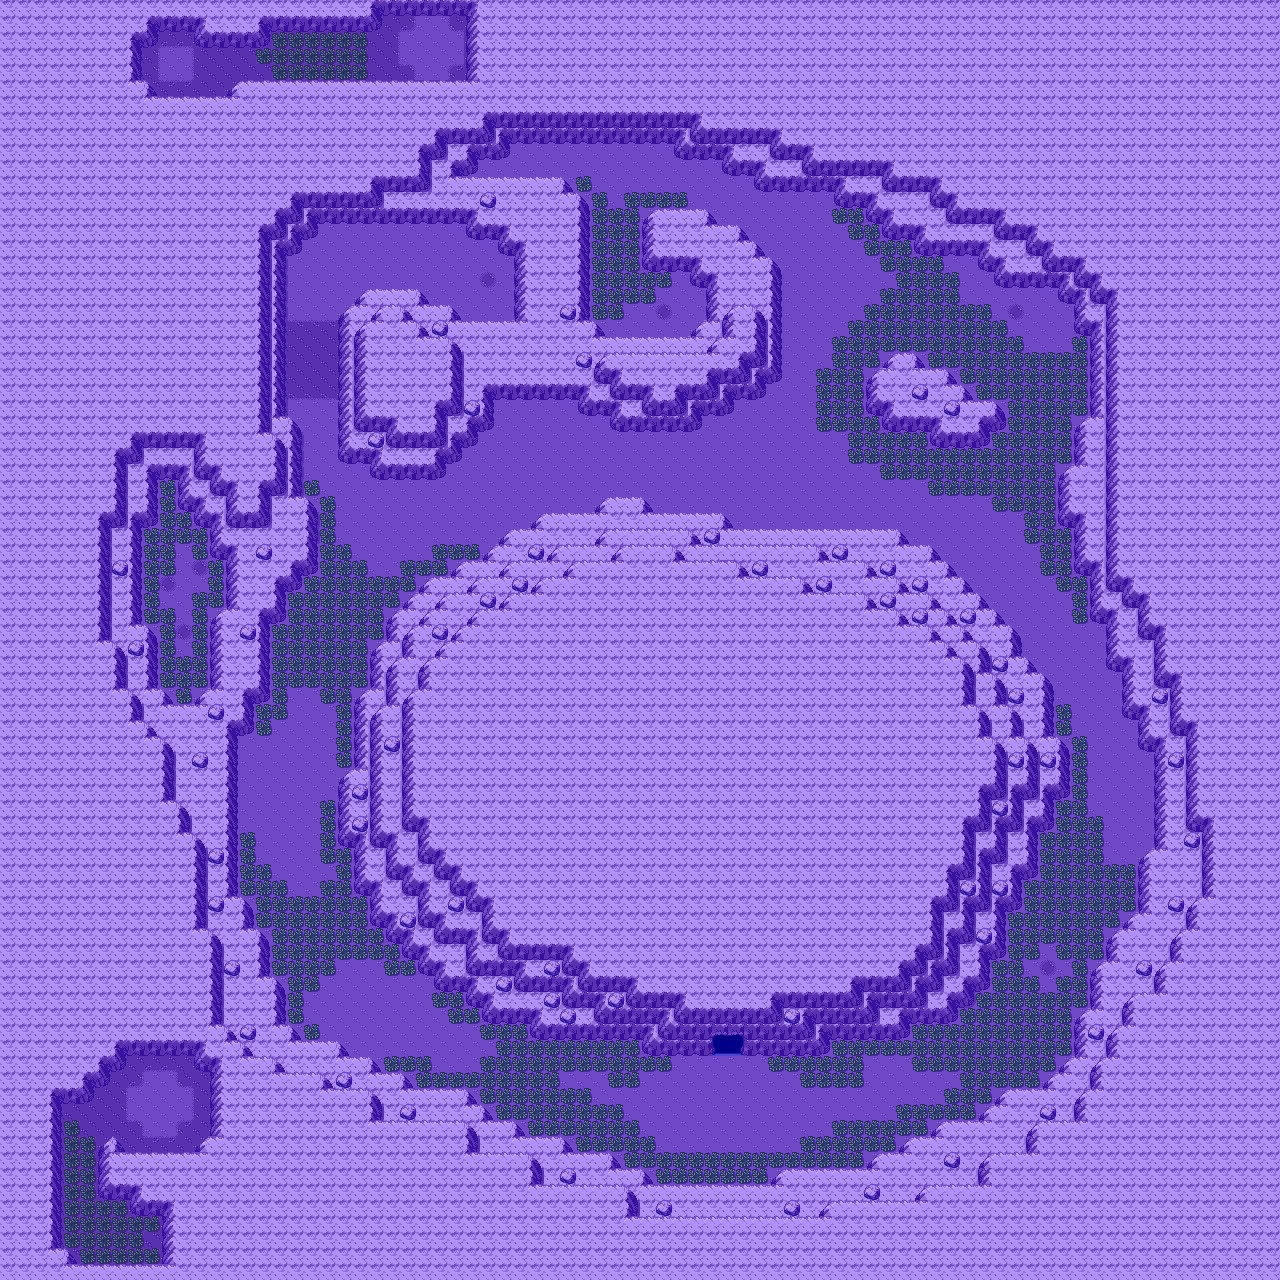 A purple and blue pixelated object

Description automatically generated